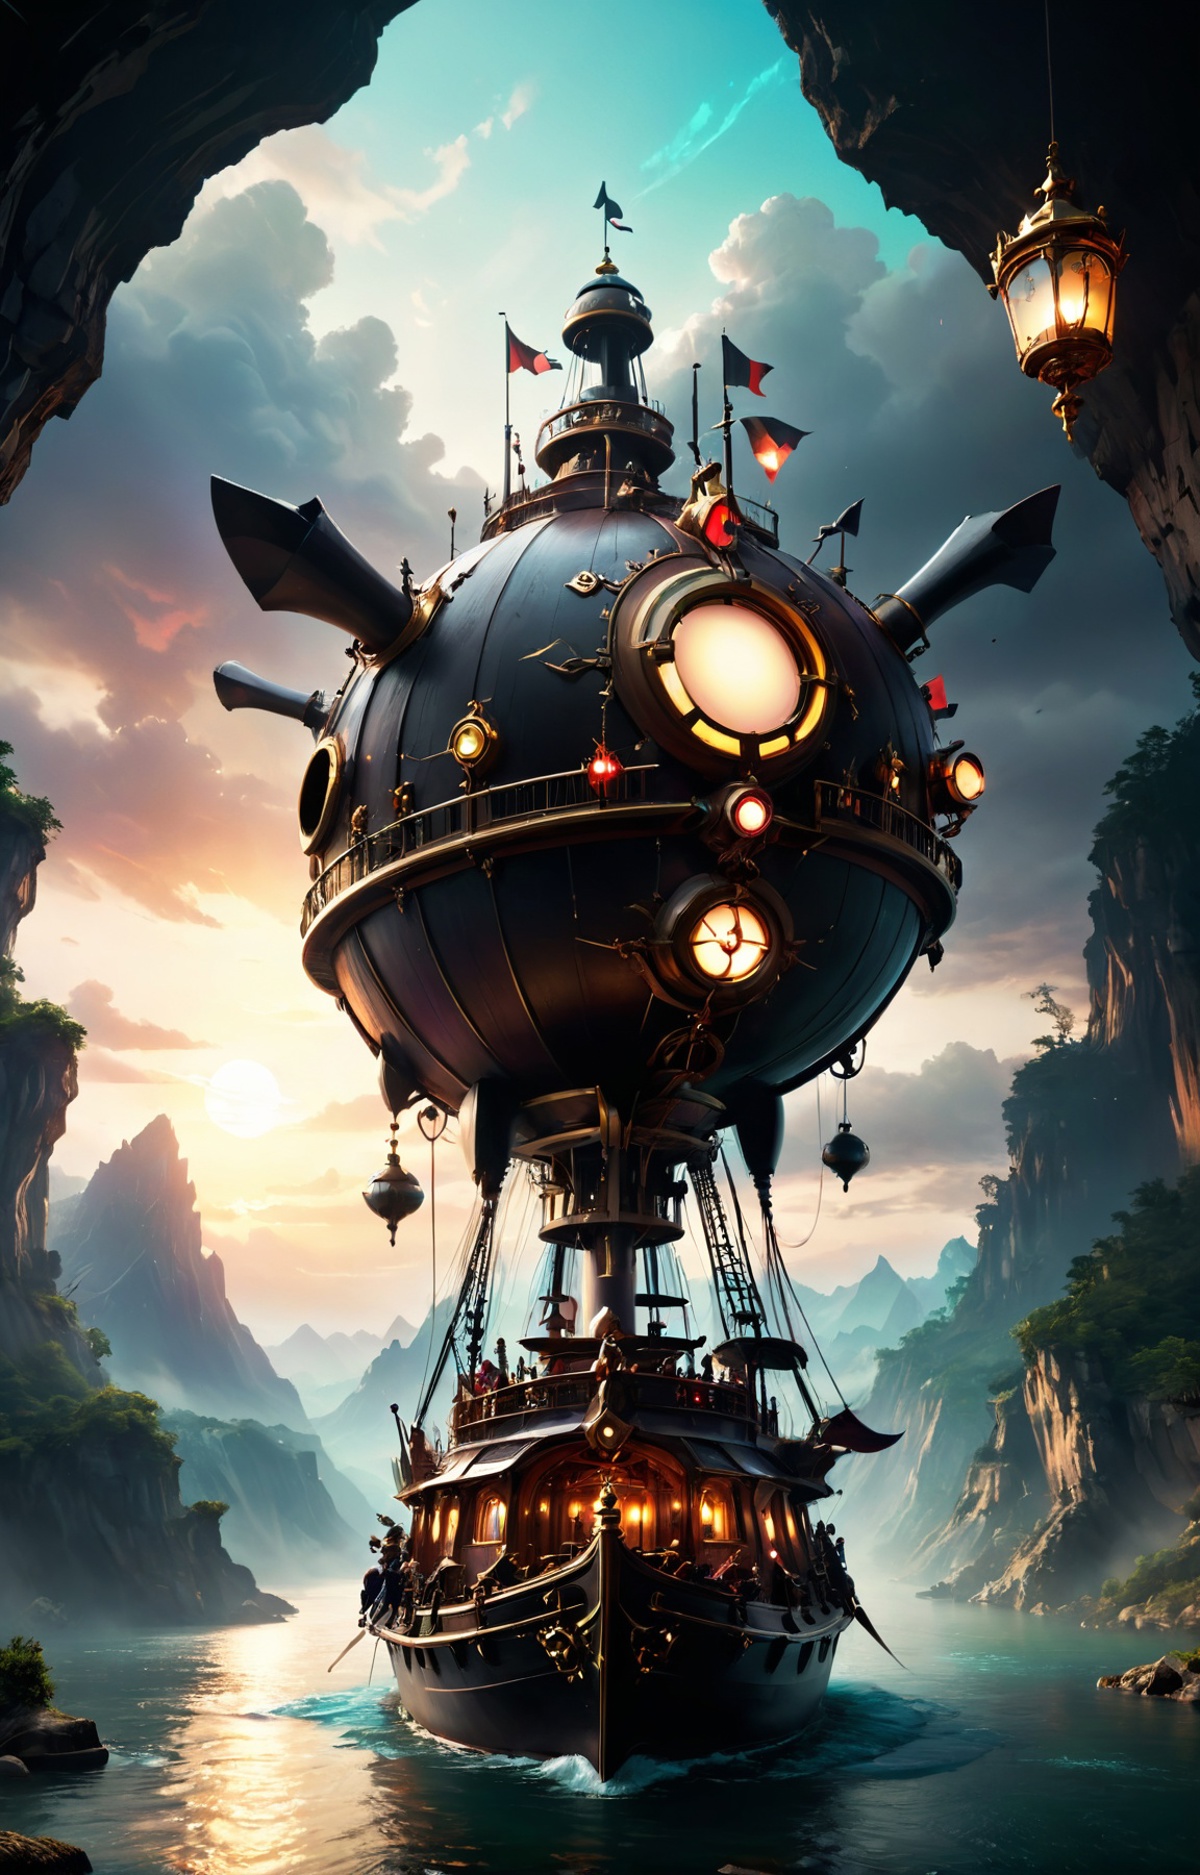 The Sky Pirate Ship Adventure in the Mountains: An Epic Illustration